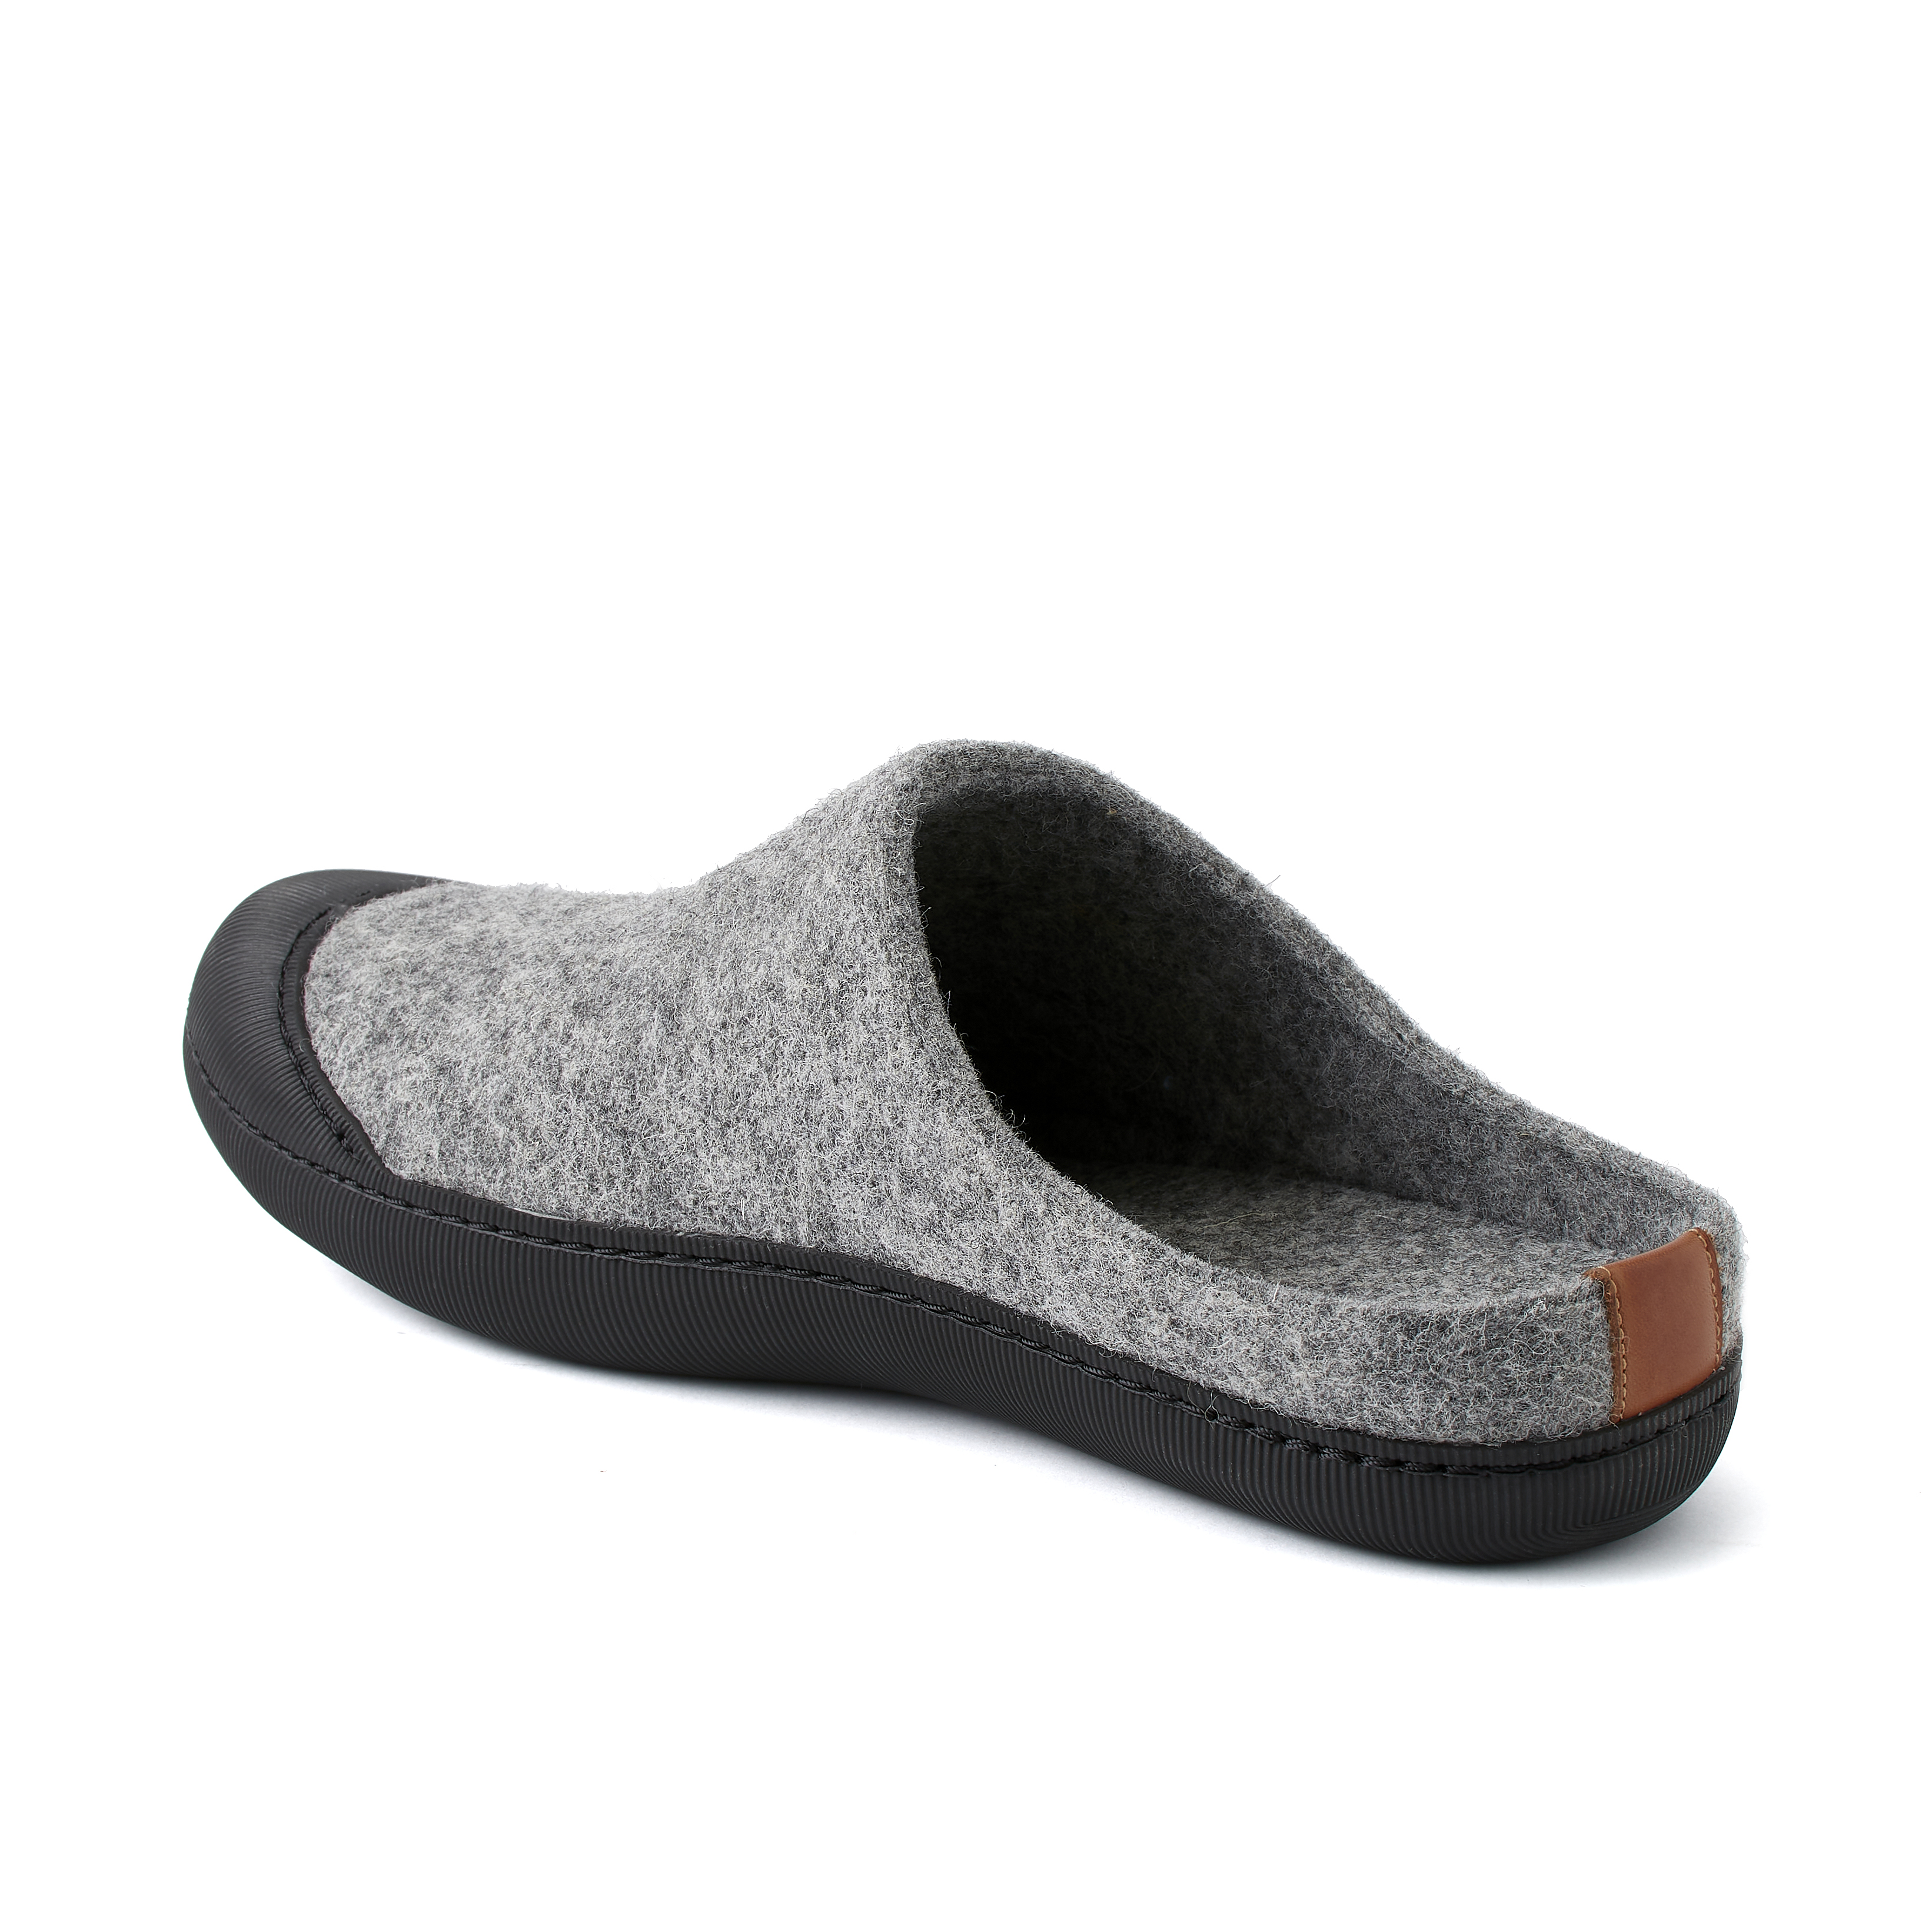 Slippers You Can Actually Wear Outside